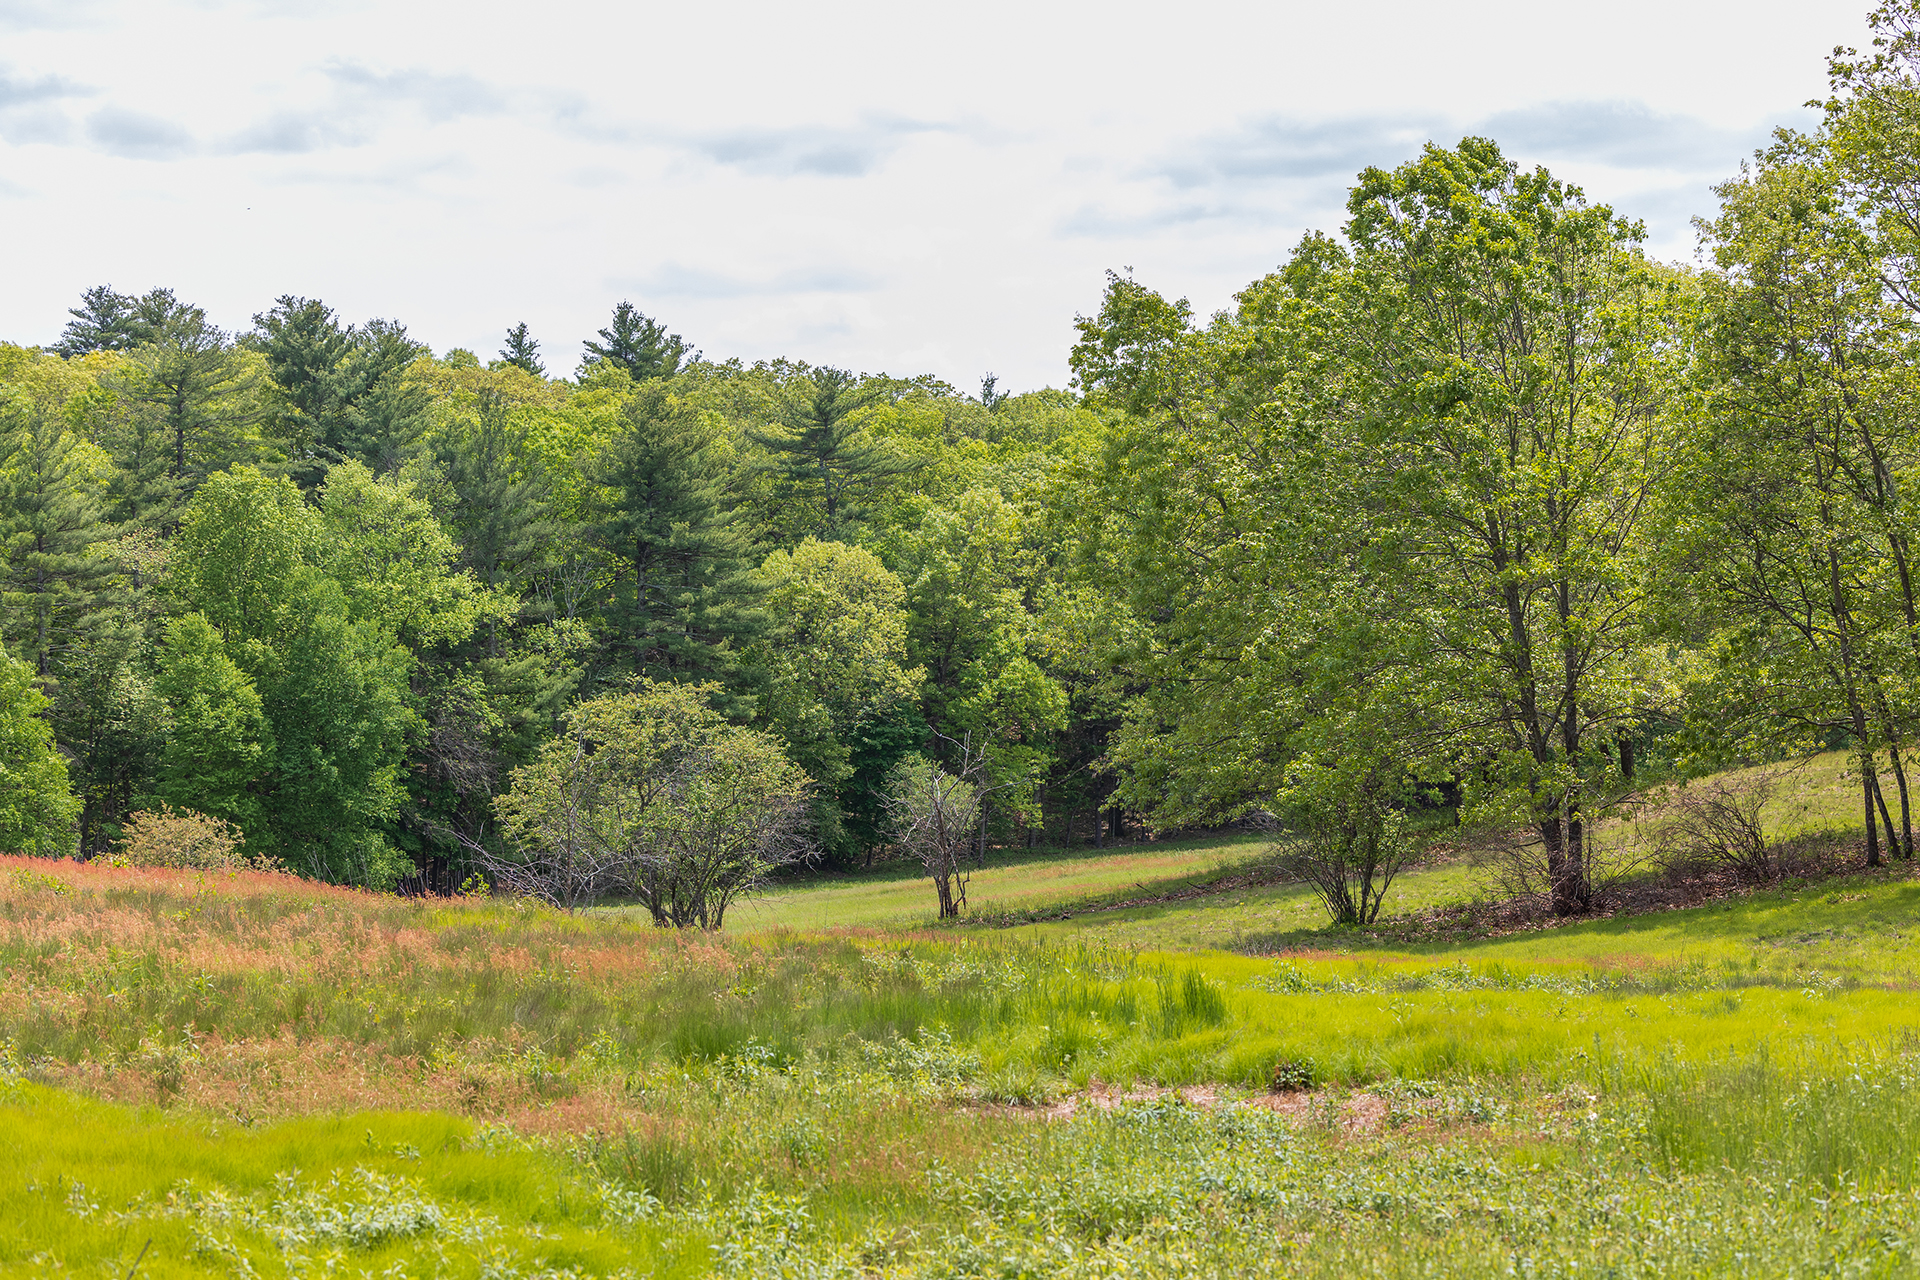 A lush green meadow studded with trees in the middle distance